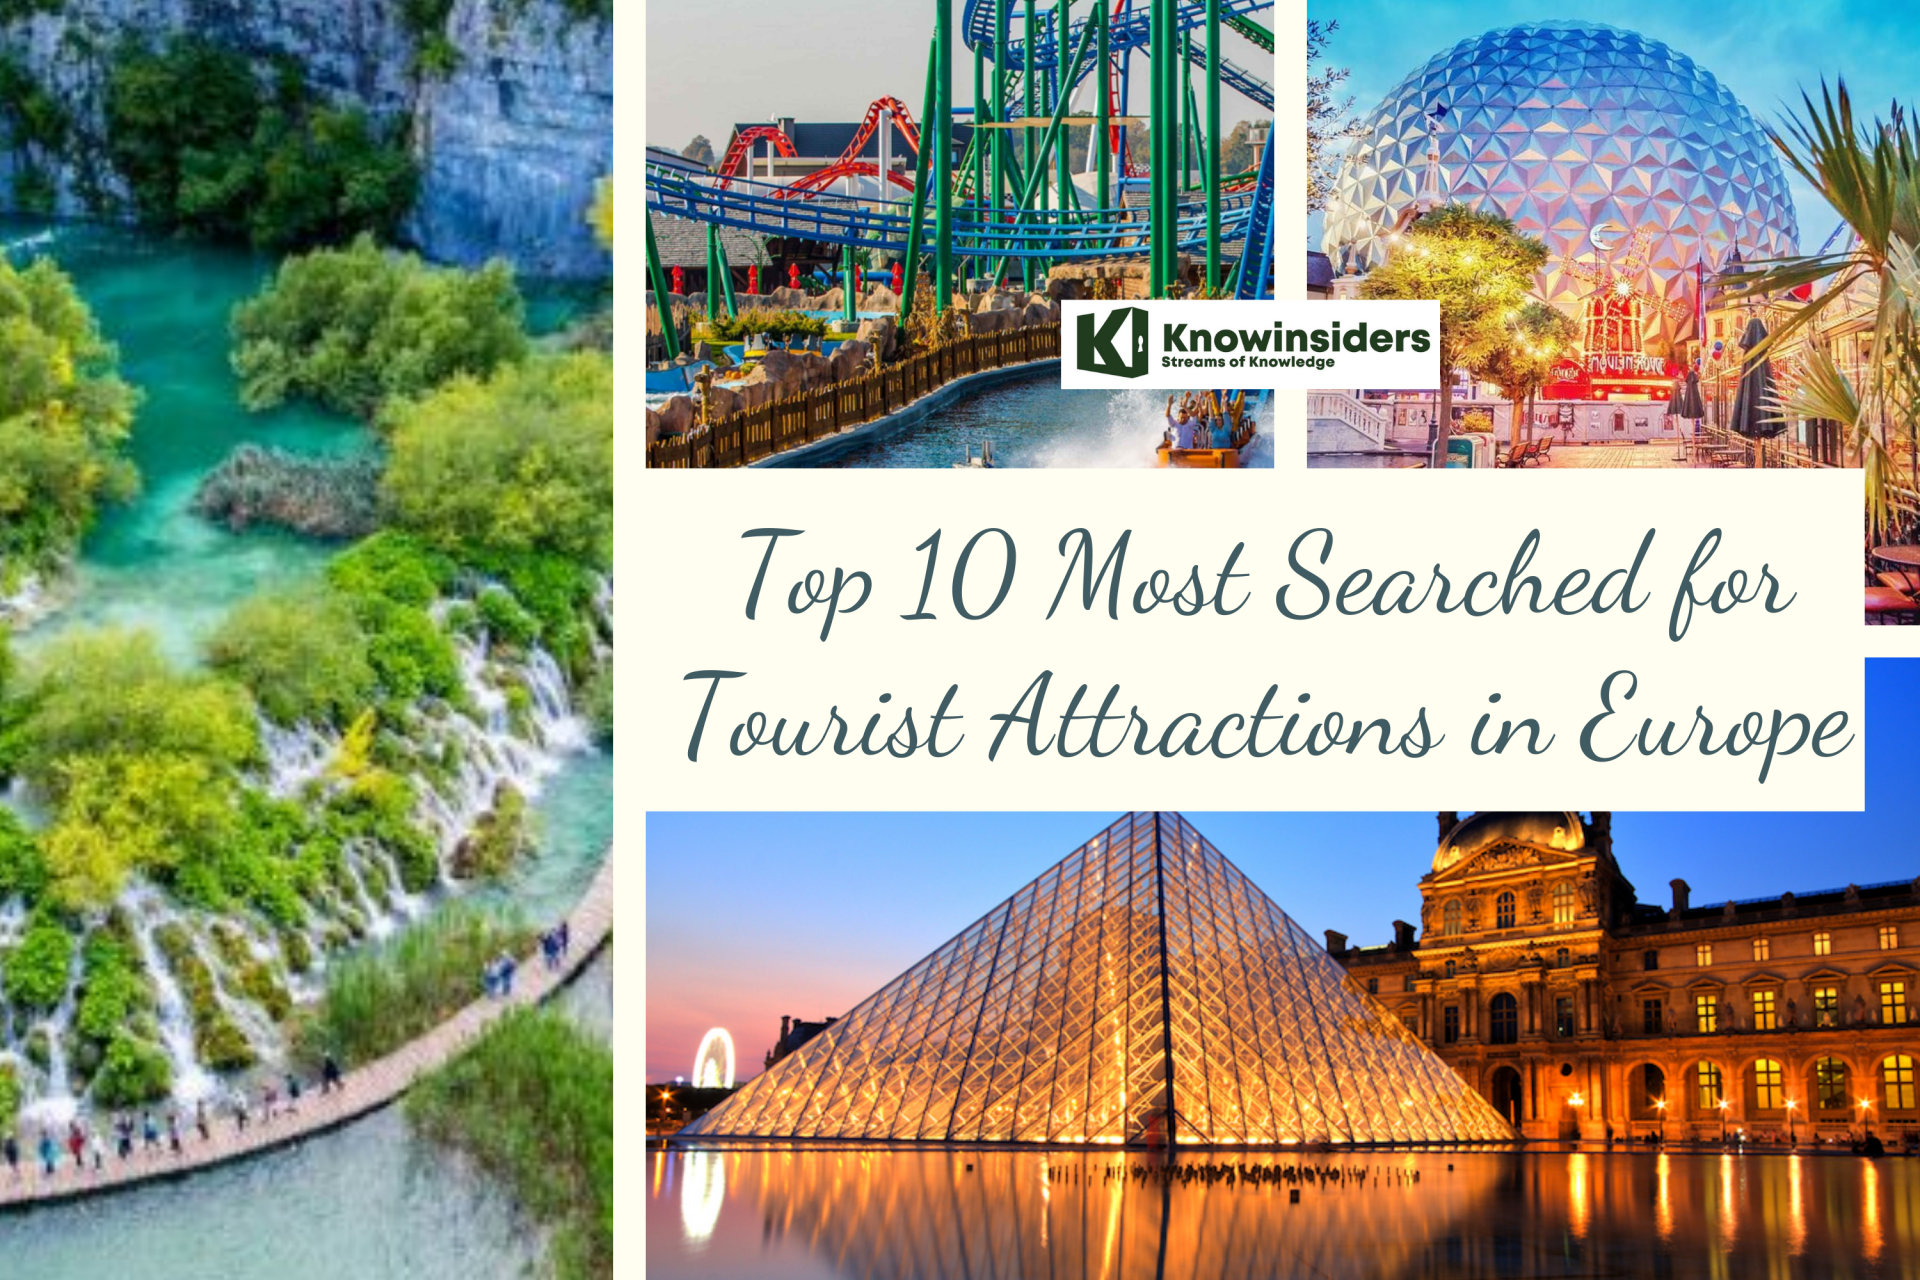 Top 10 Most Searched for Tourist Attractions in Europe